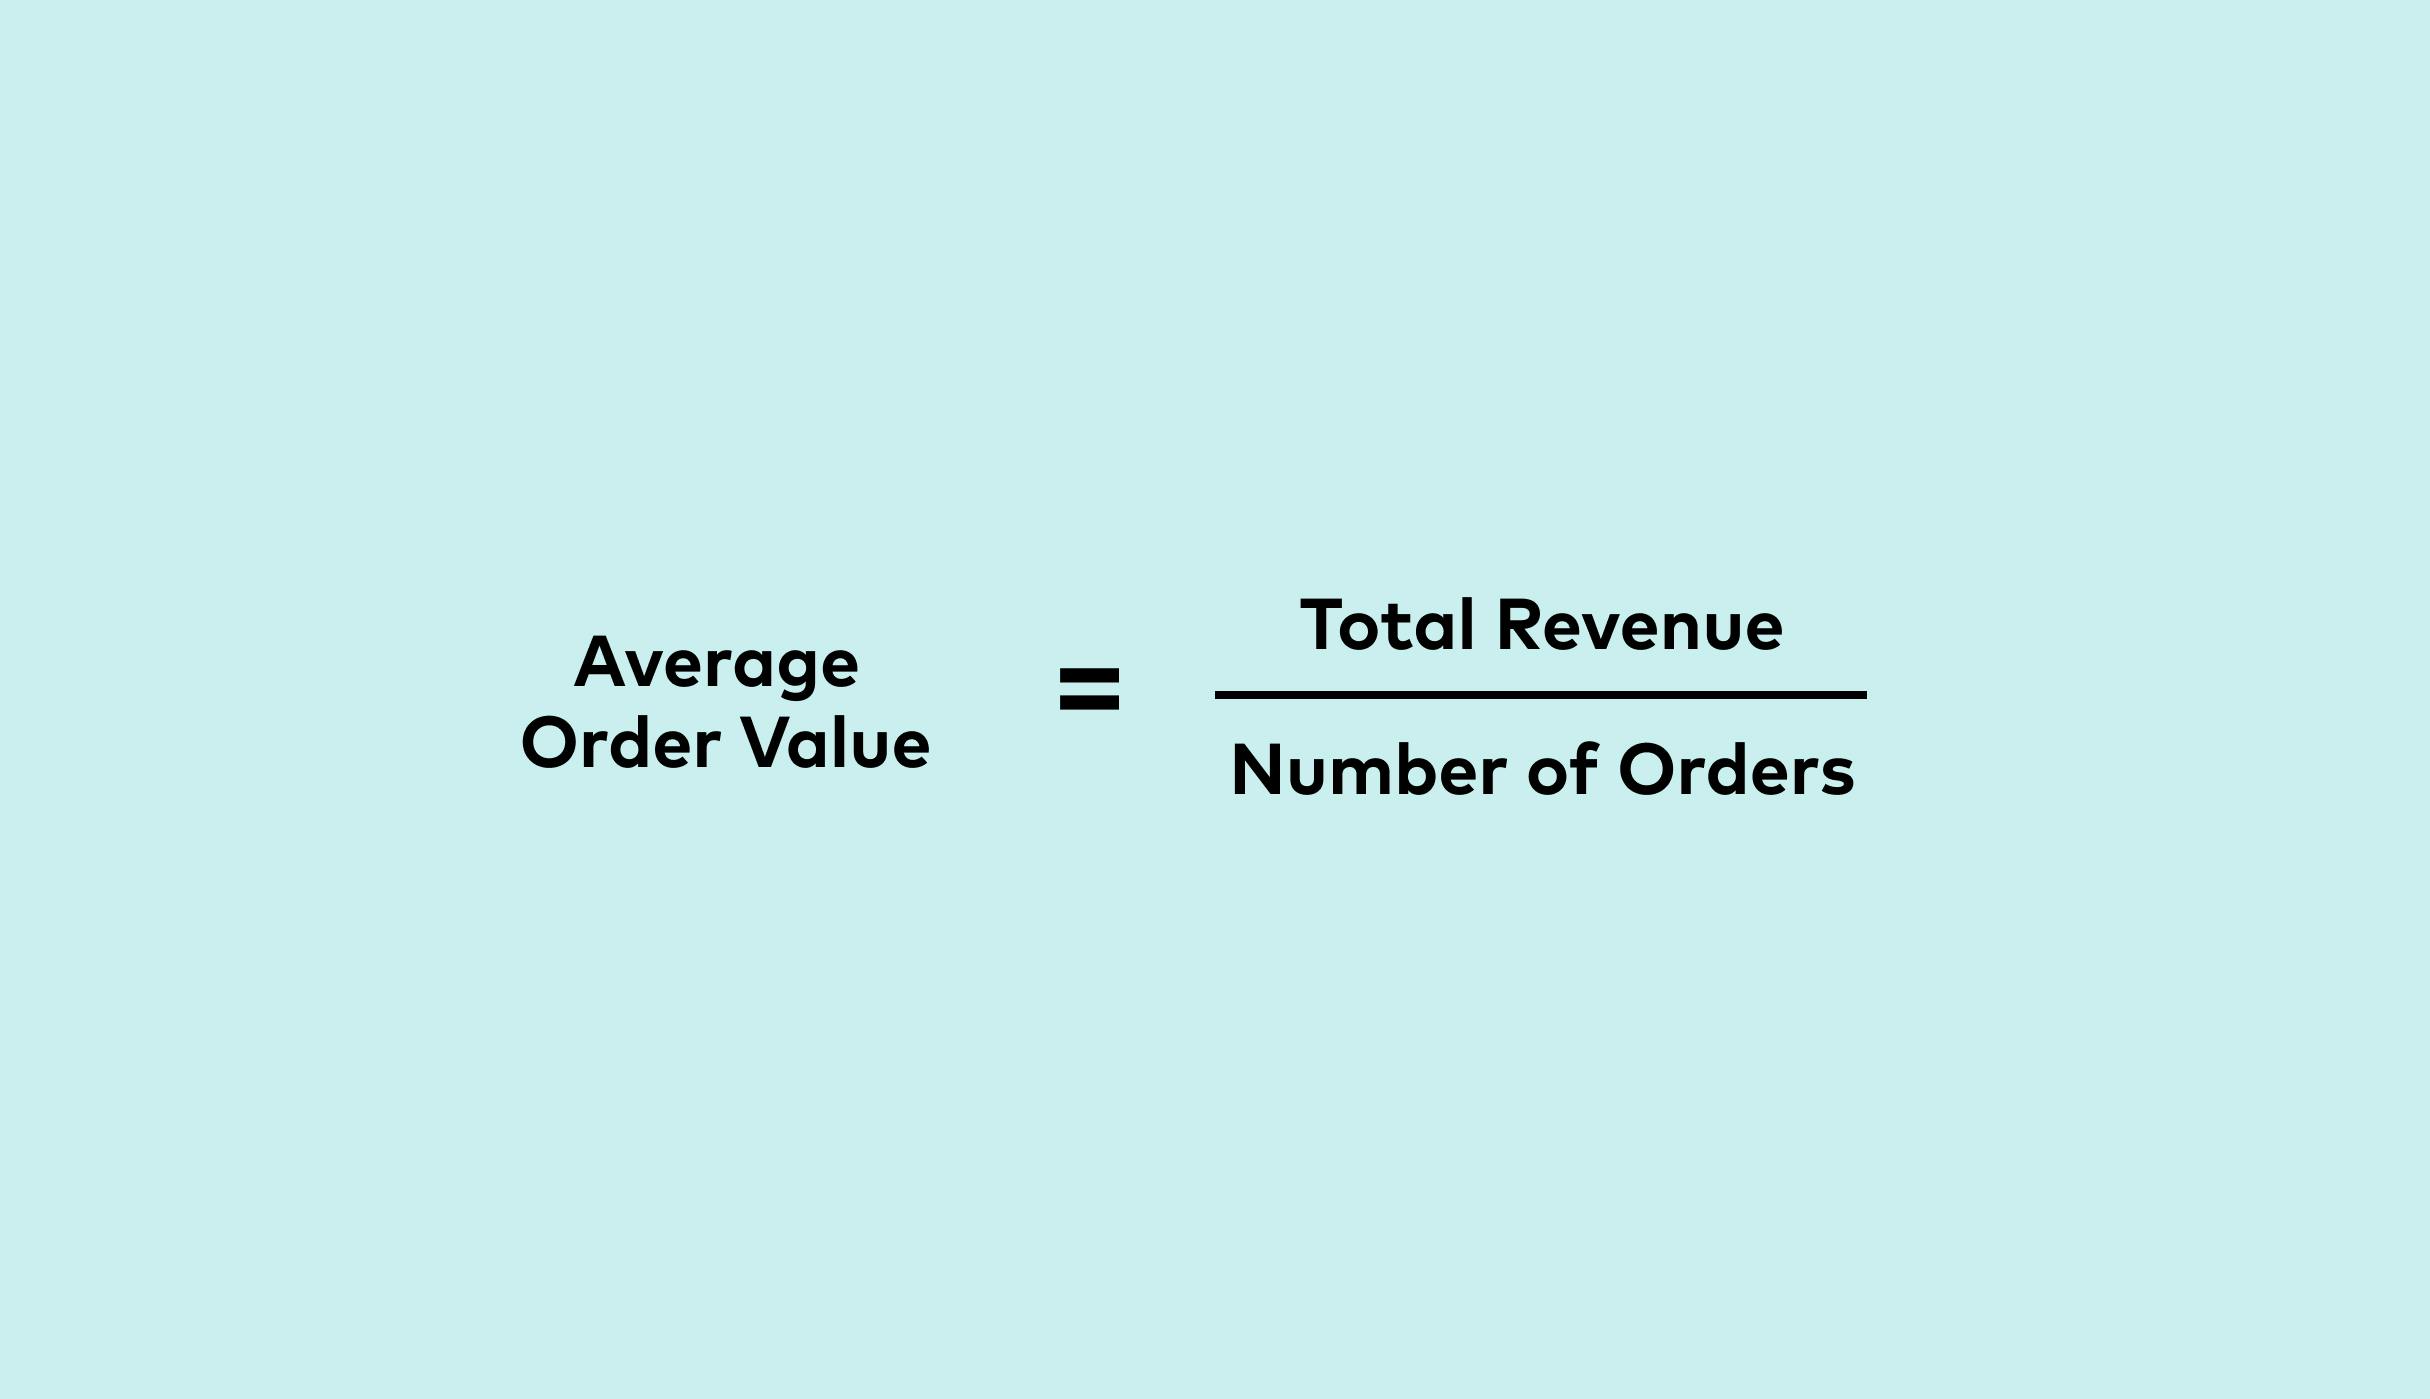 Average Order Value = Total Revenue divided by Number of Orders